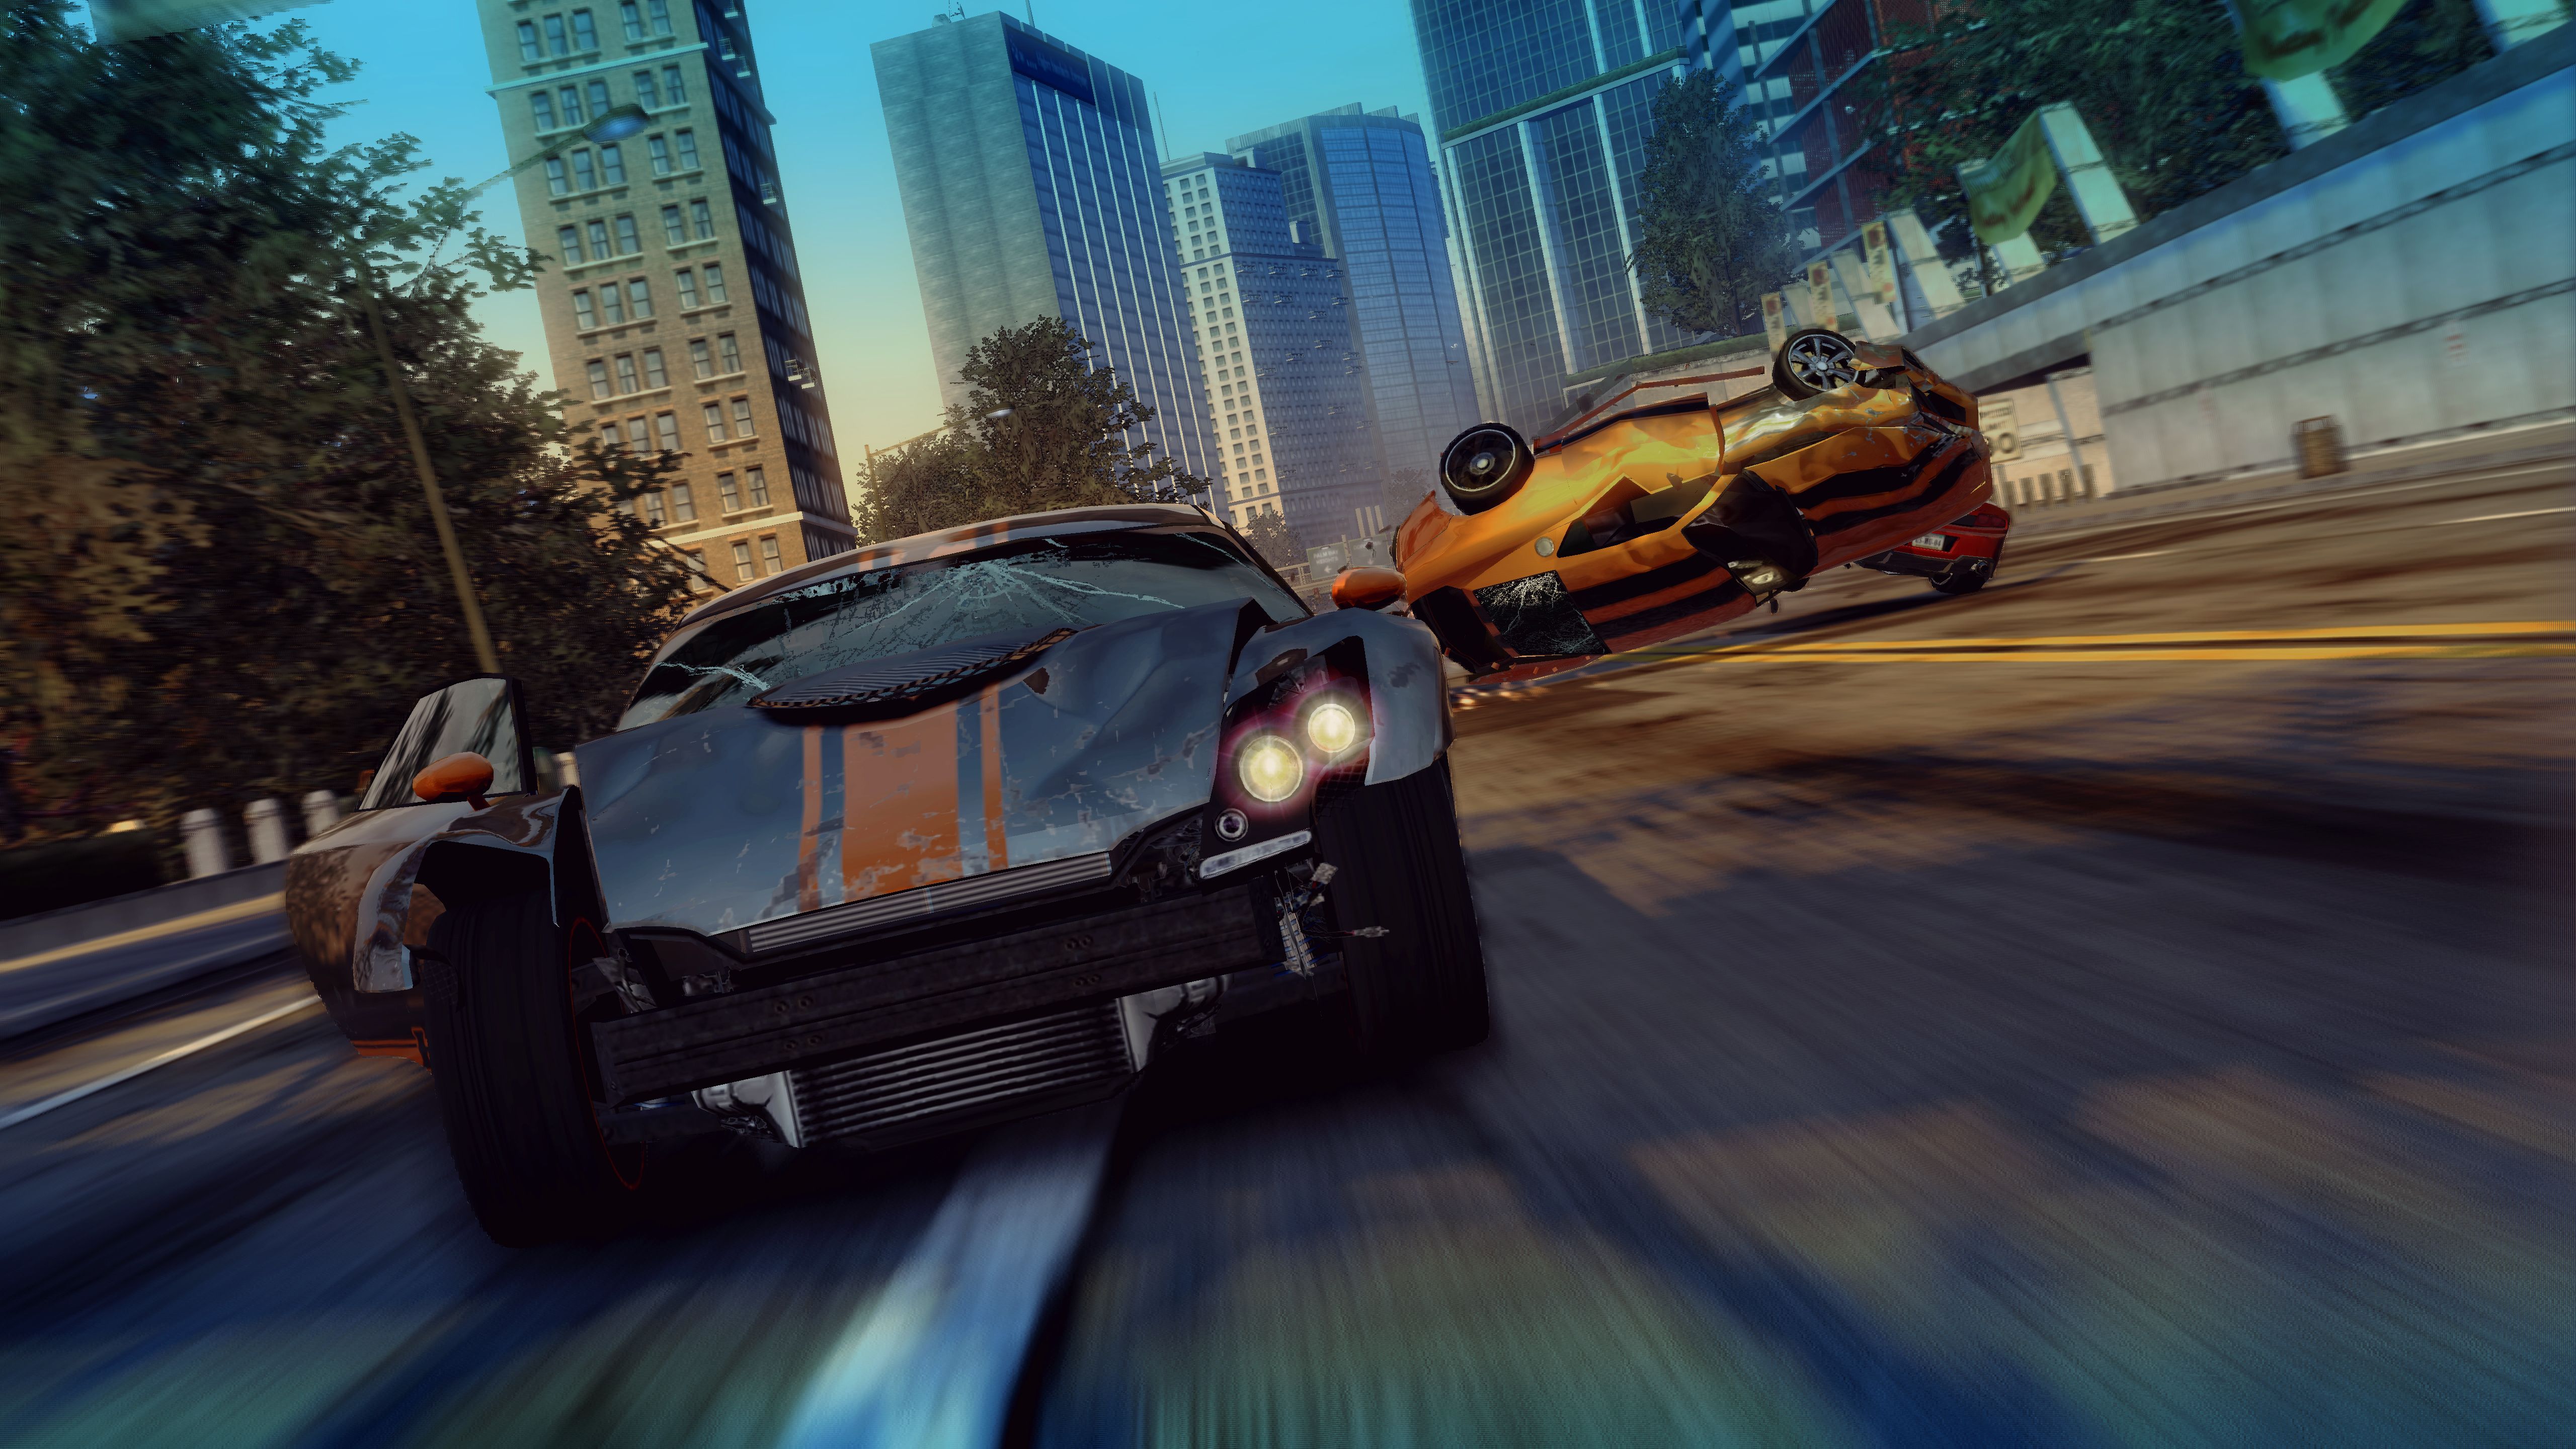 how to install burnout 3 takedown for pc